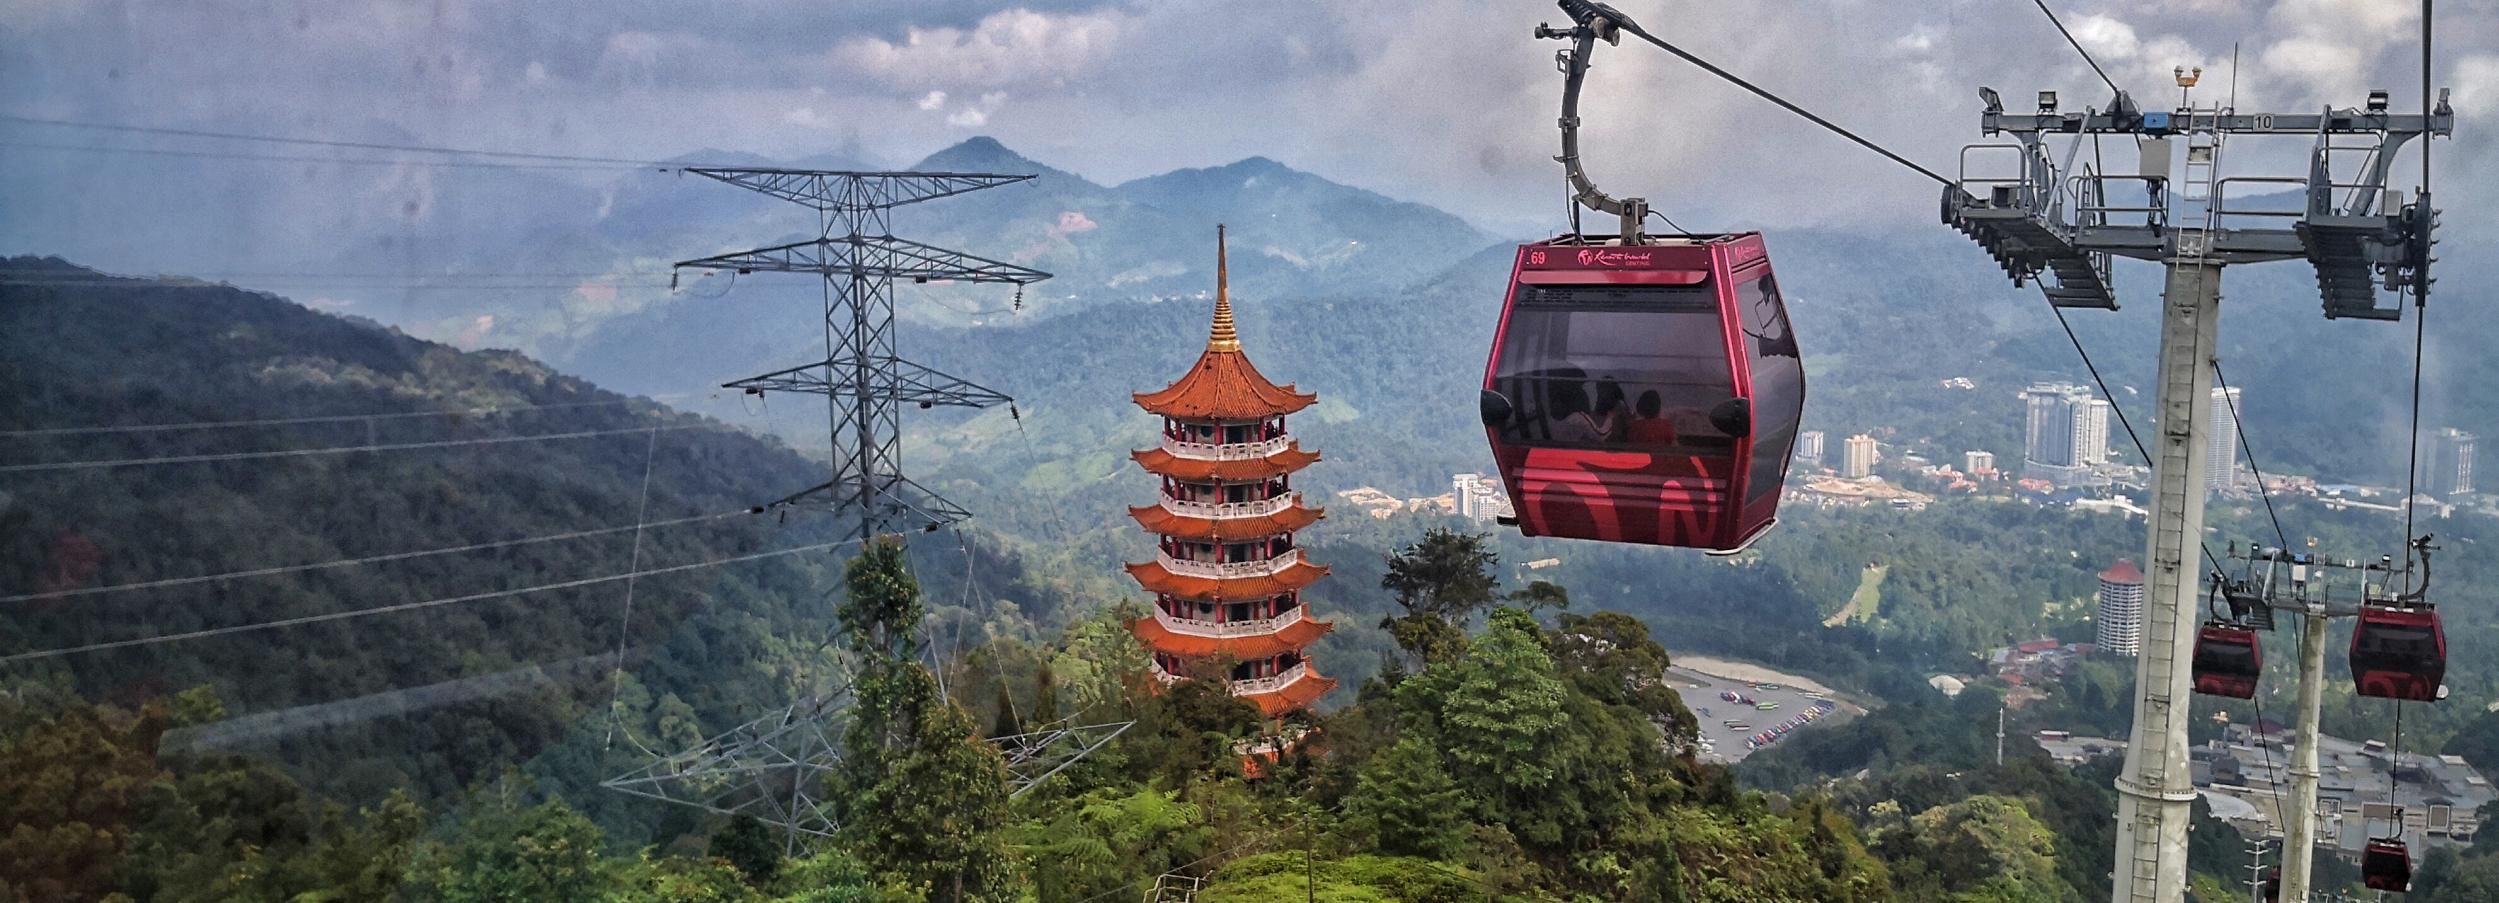 Genting Highlands 2021 Top 10 Tours & Activities (with Photos